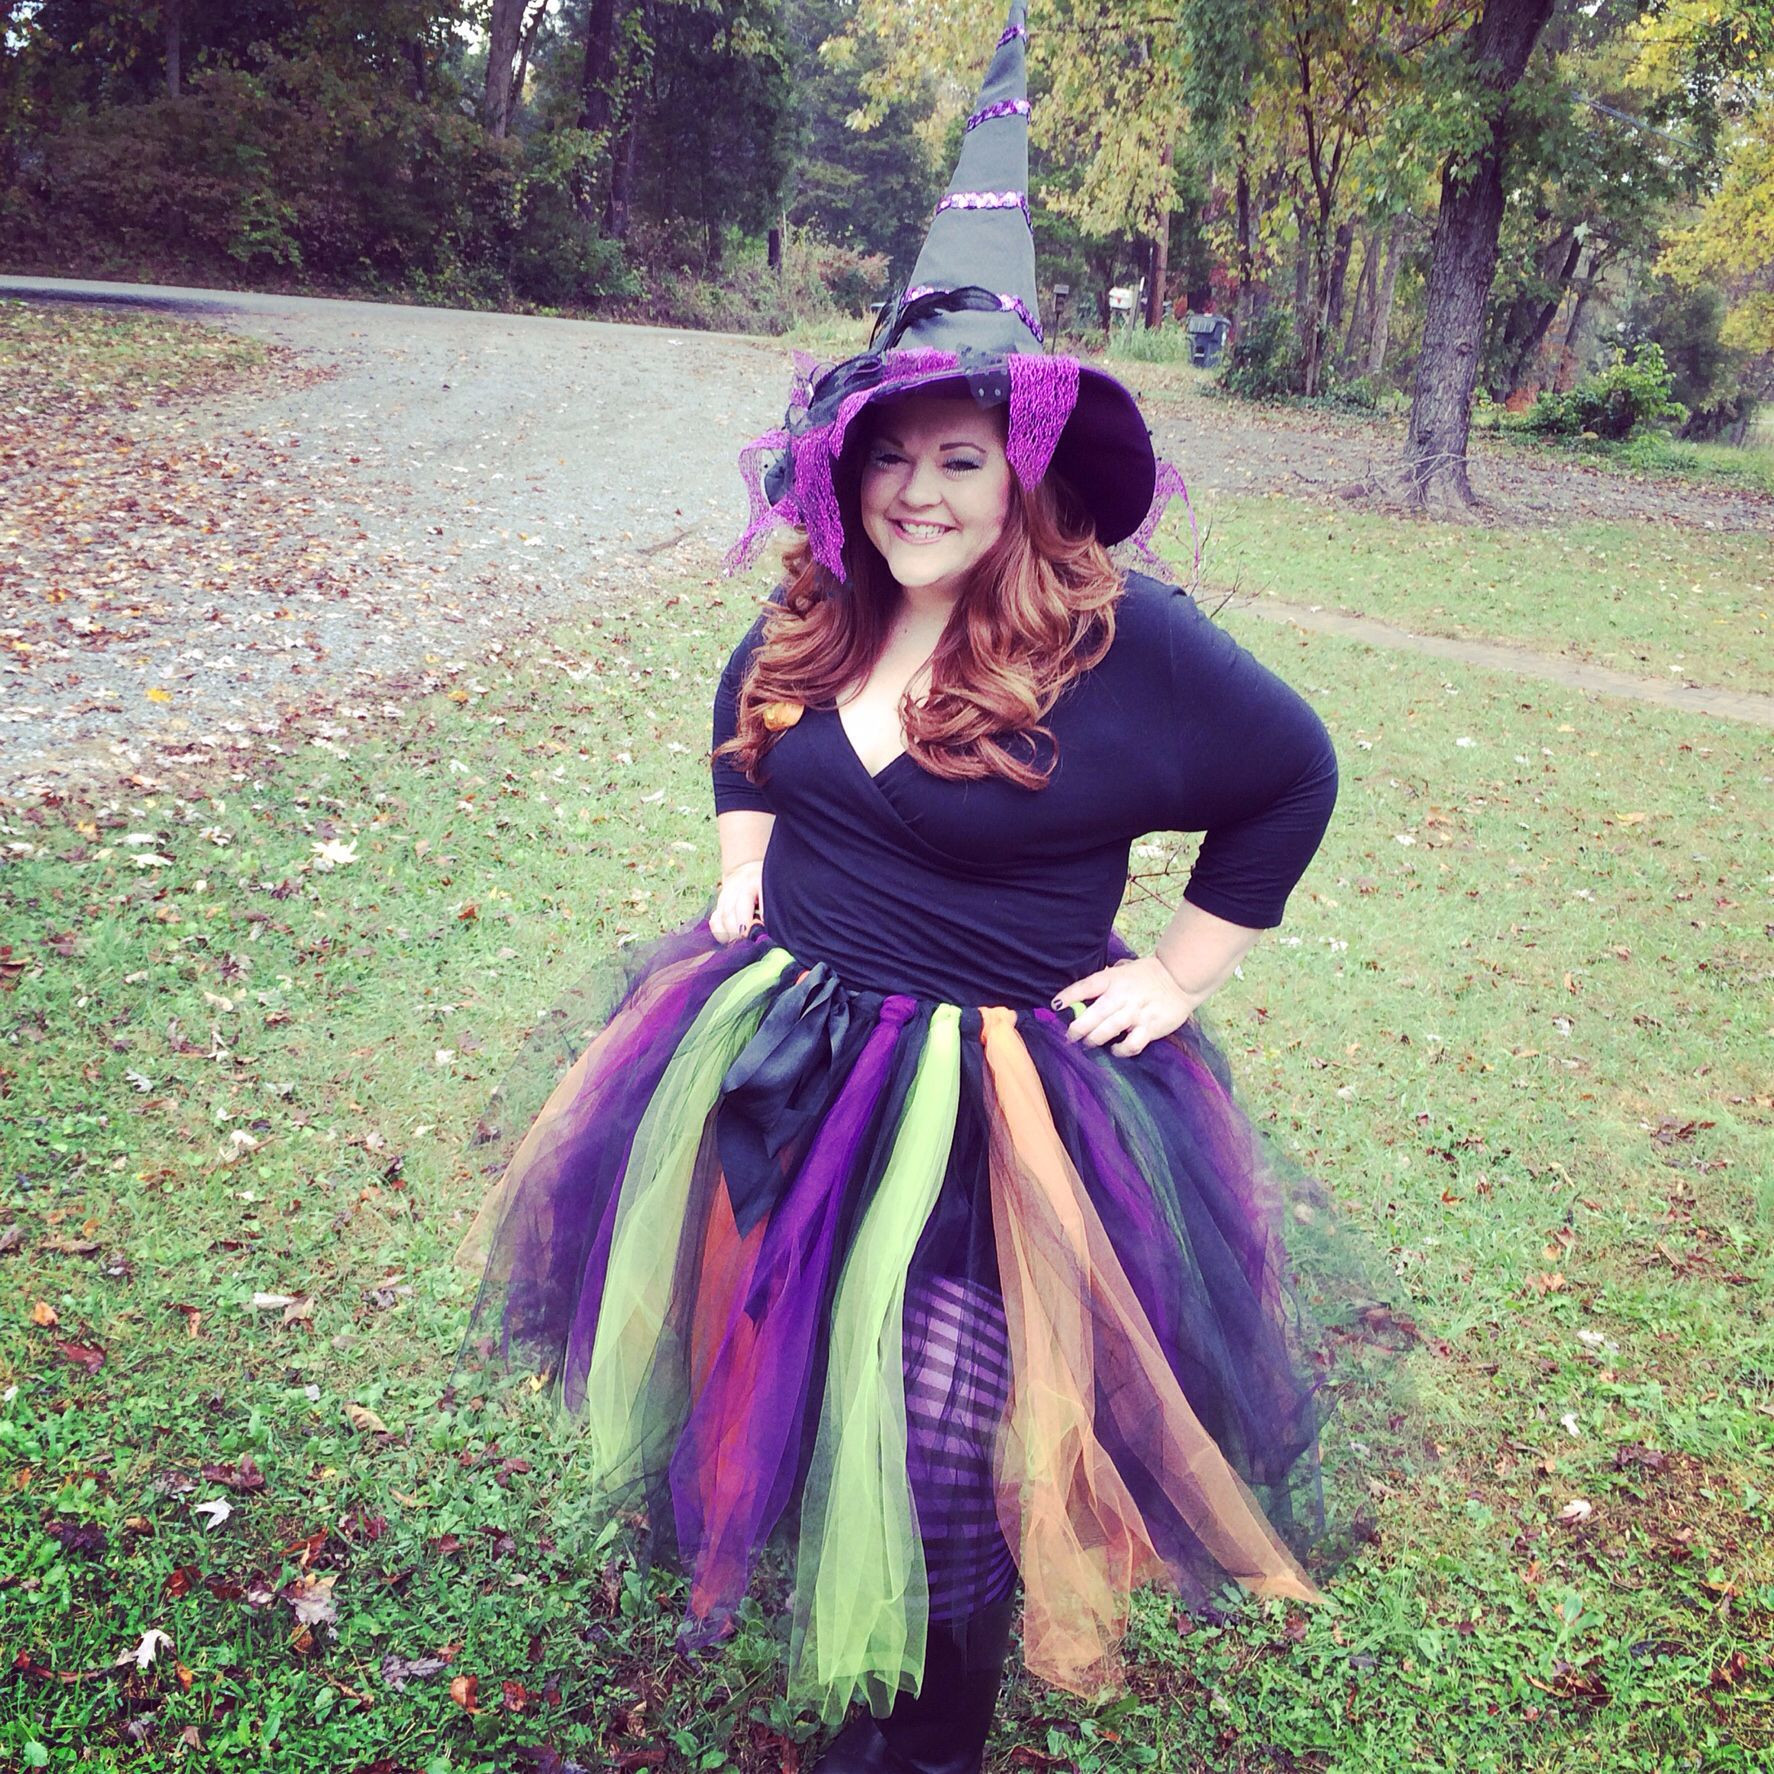 DIY Plus Size Costumes
 Halloween costume DIY Witch Hat Pier e $19 99 Tights